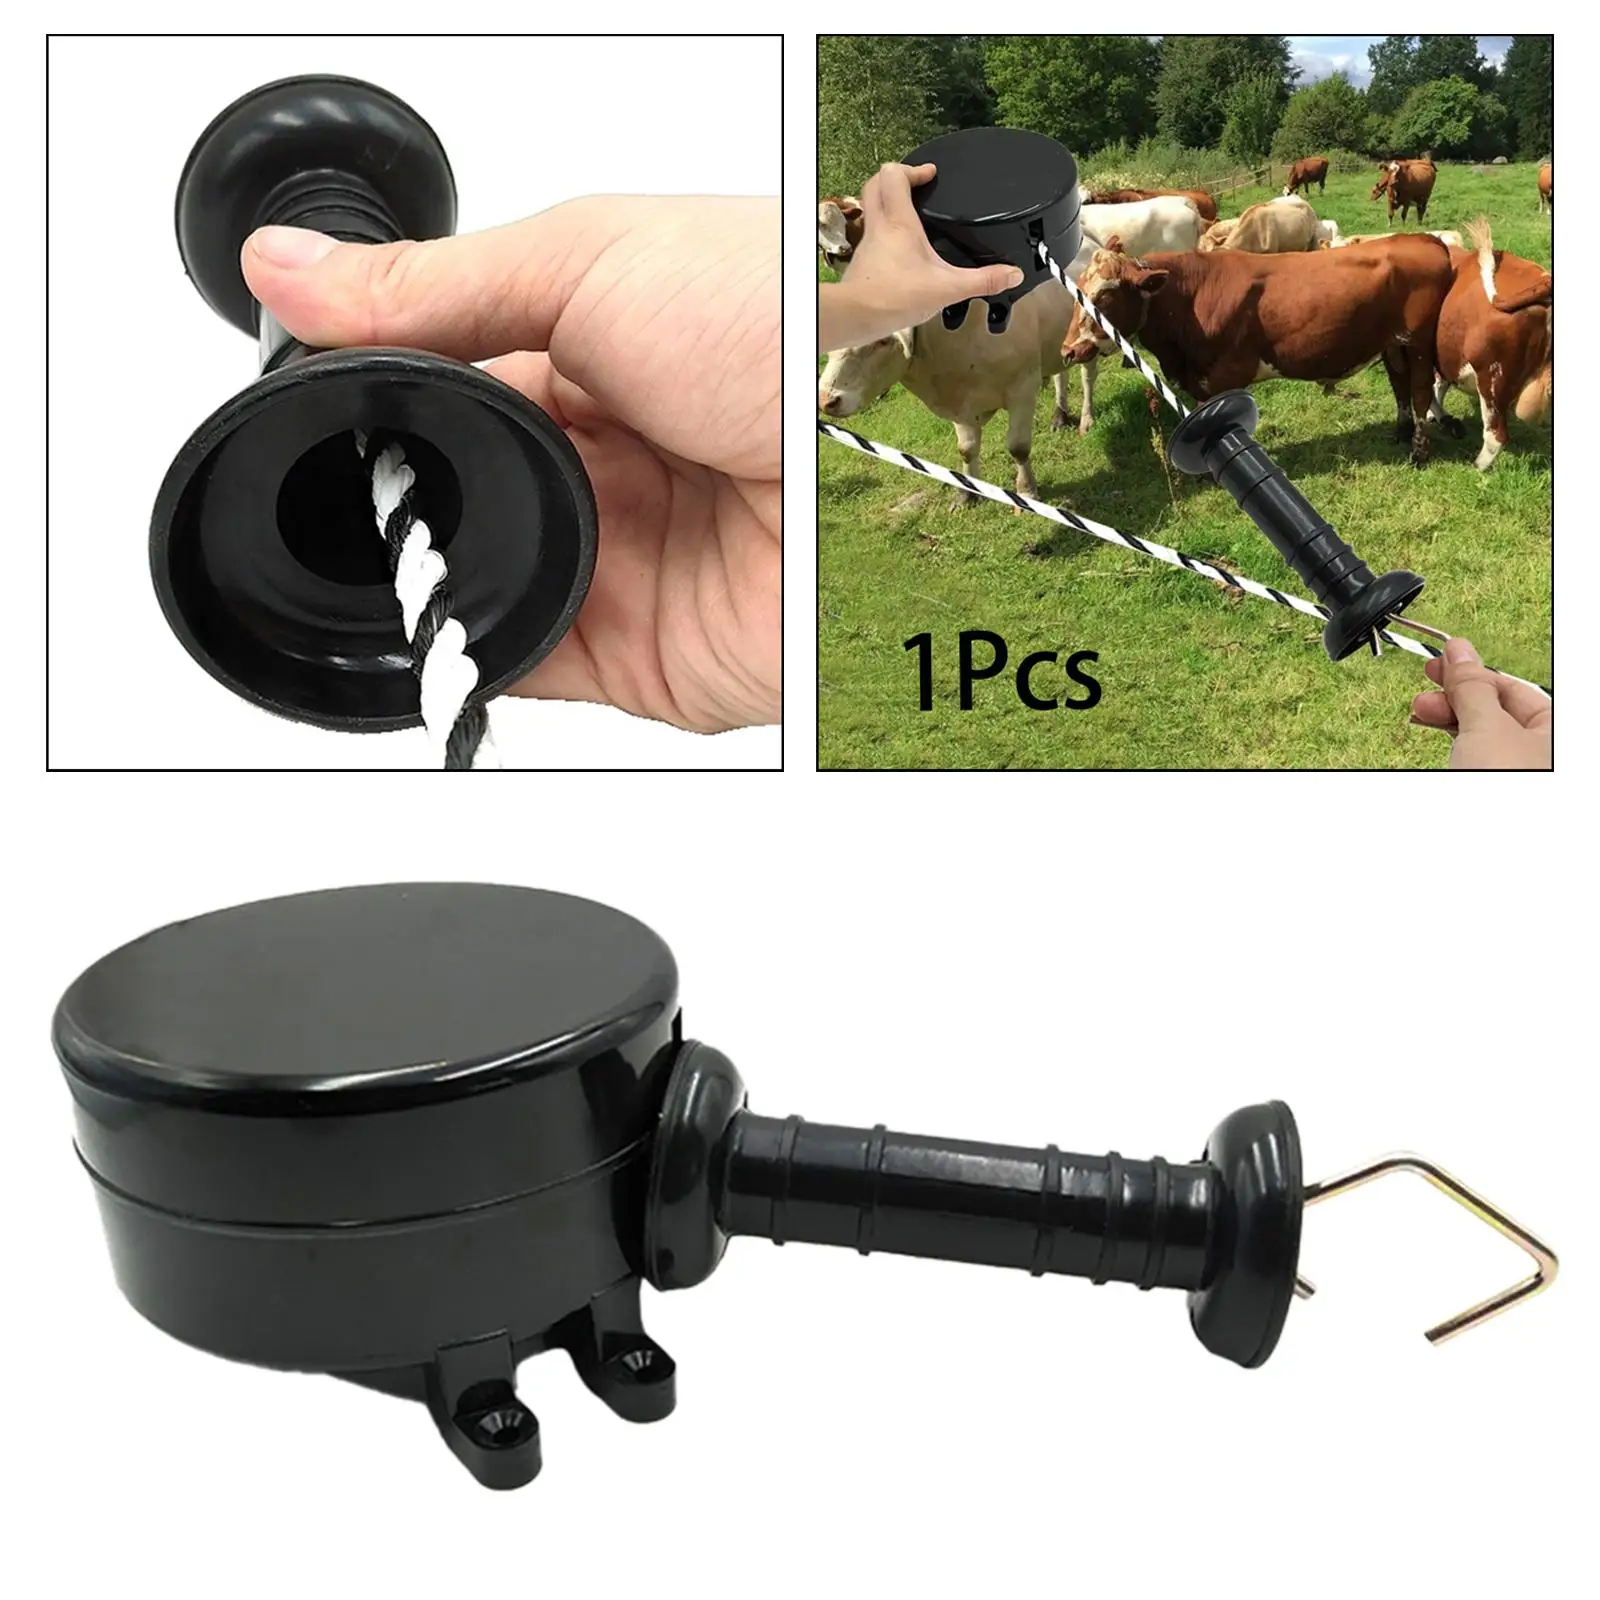 Fence Gate Handle Wear Resistant Easy to Install Gates Handles Retractable for Farm Supply Ranch Animal Husbandry Fence Ranches